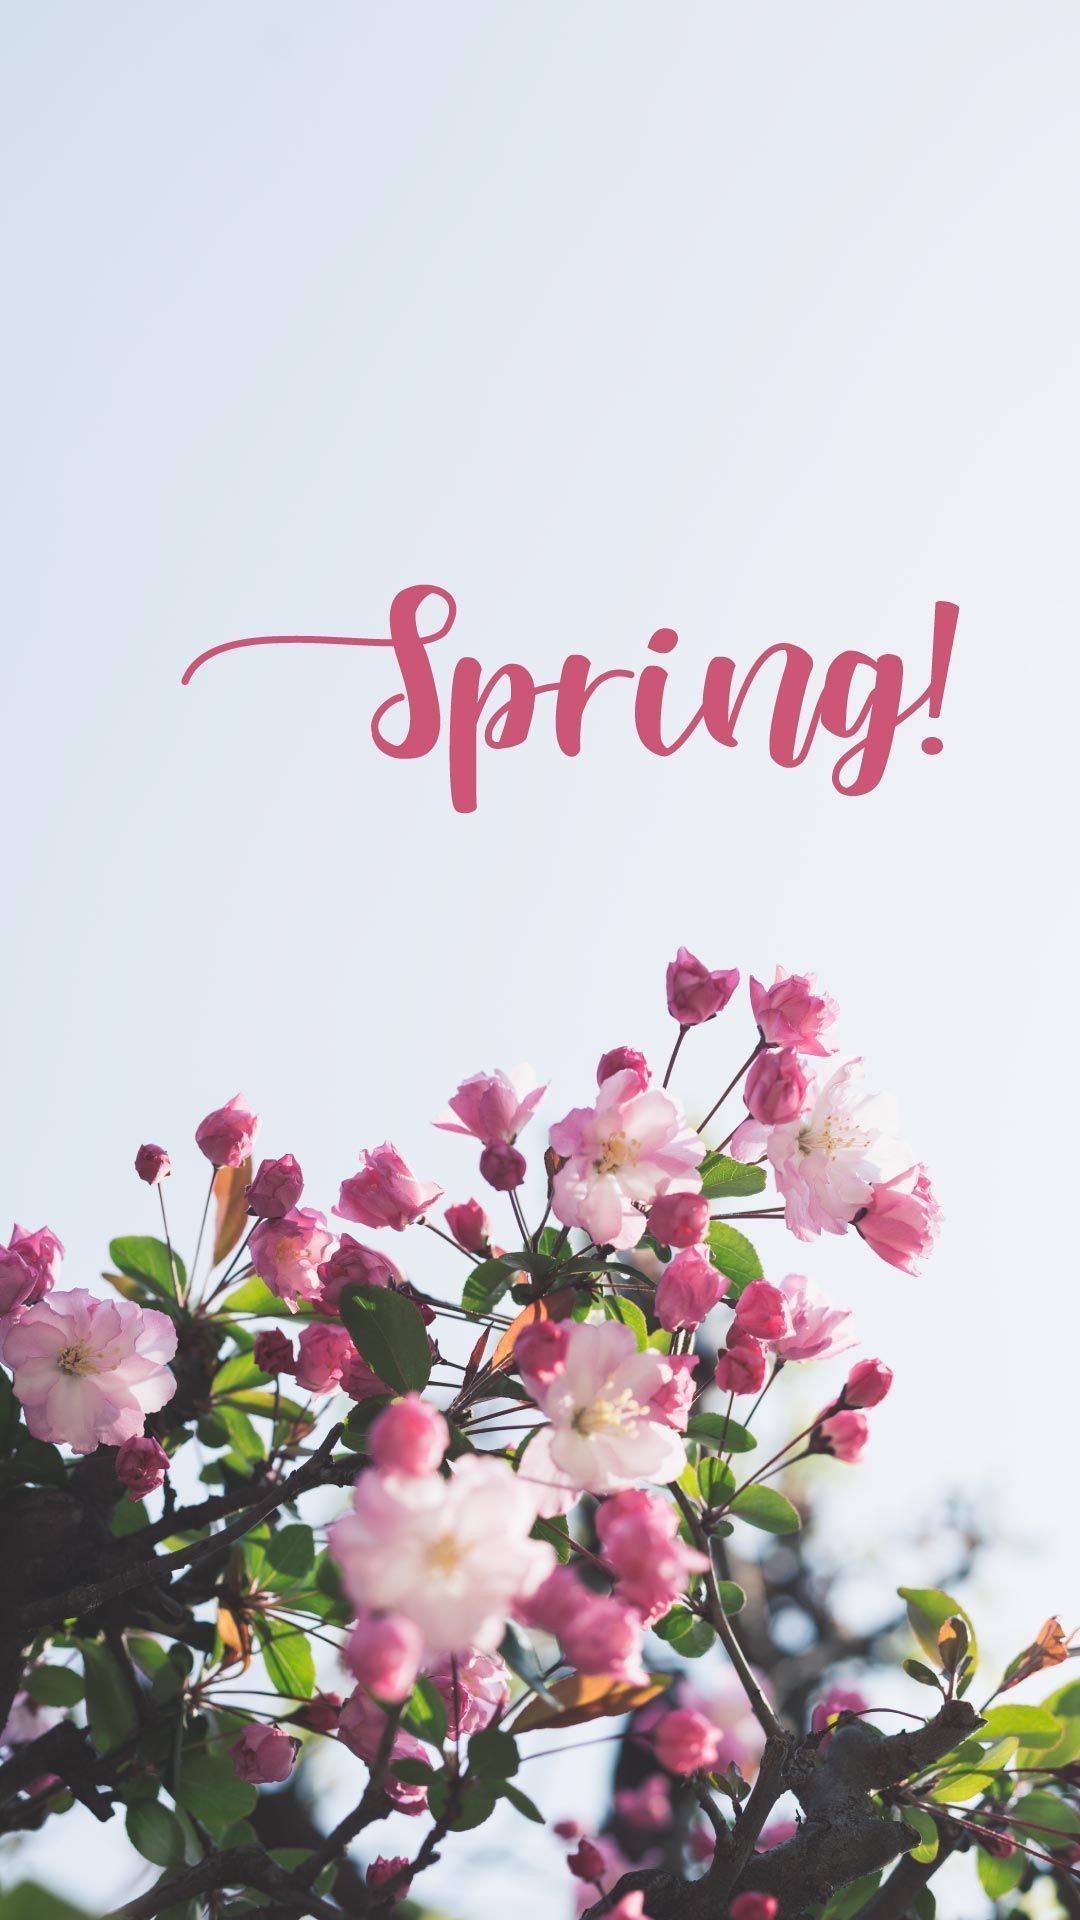 Girly Spring Wallpaper Android Download. Spring wallpaper, Minimalist iphone, Mobile wallpaper